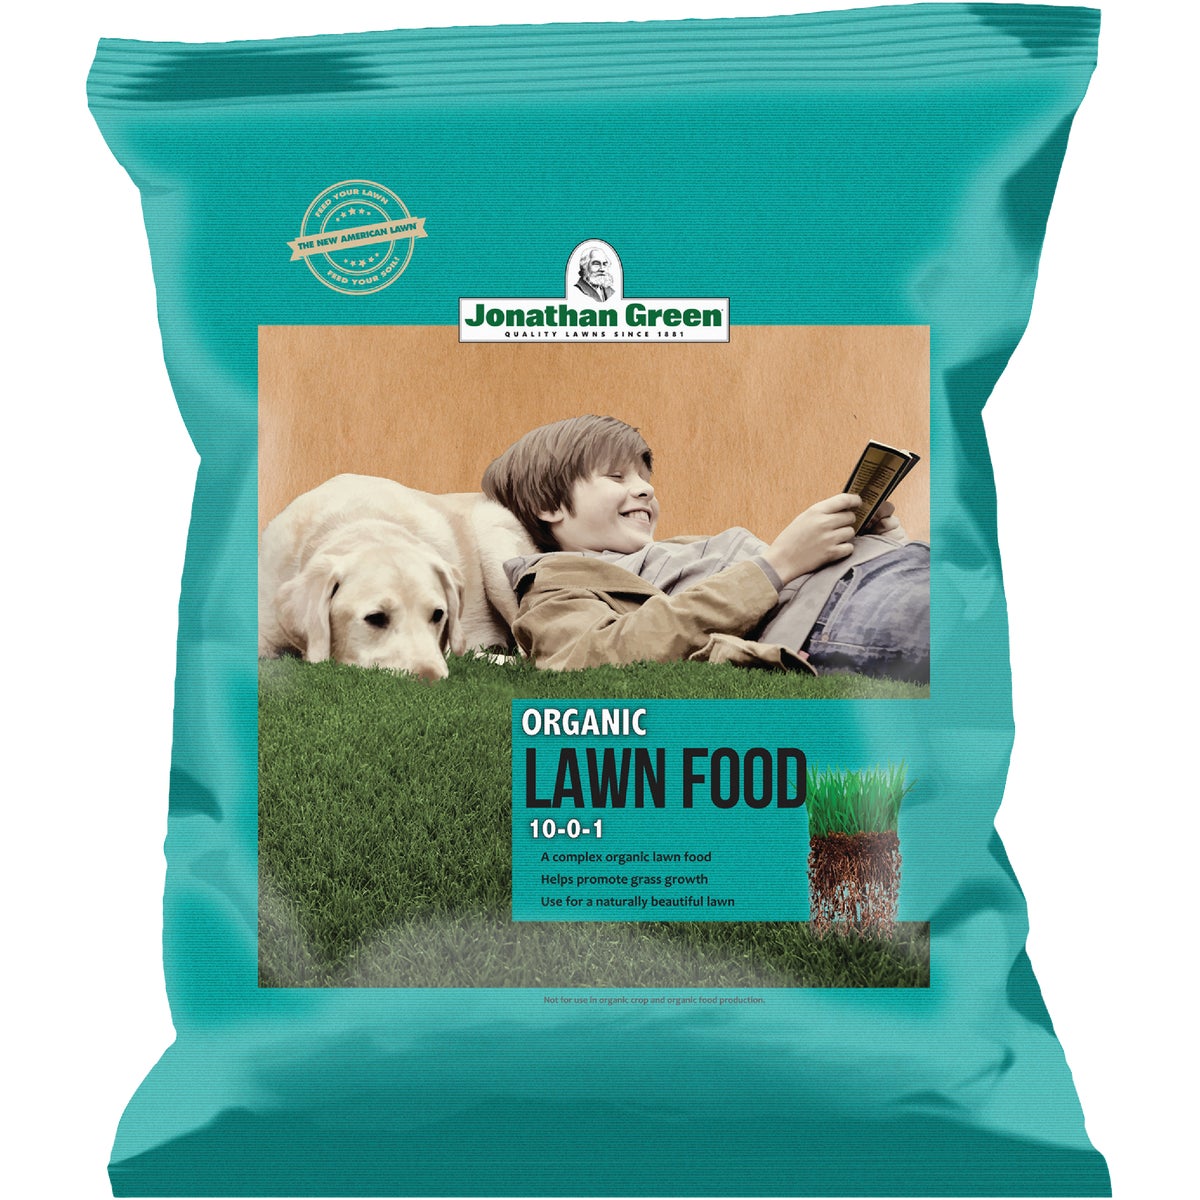 Item 701651, Organic lawn food that helps rejuvenate tired, sick lawns with a slow and 